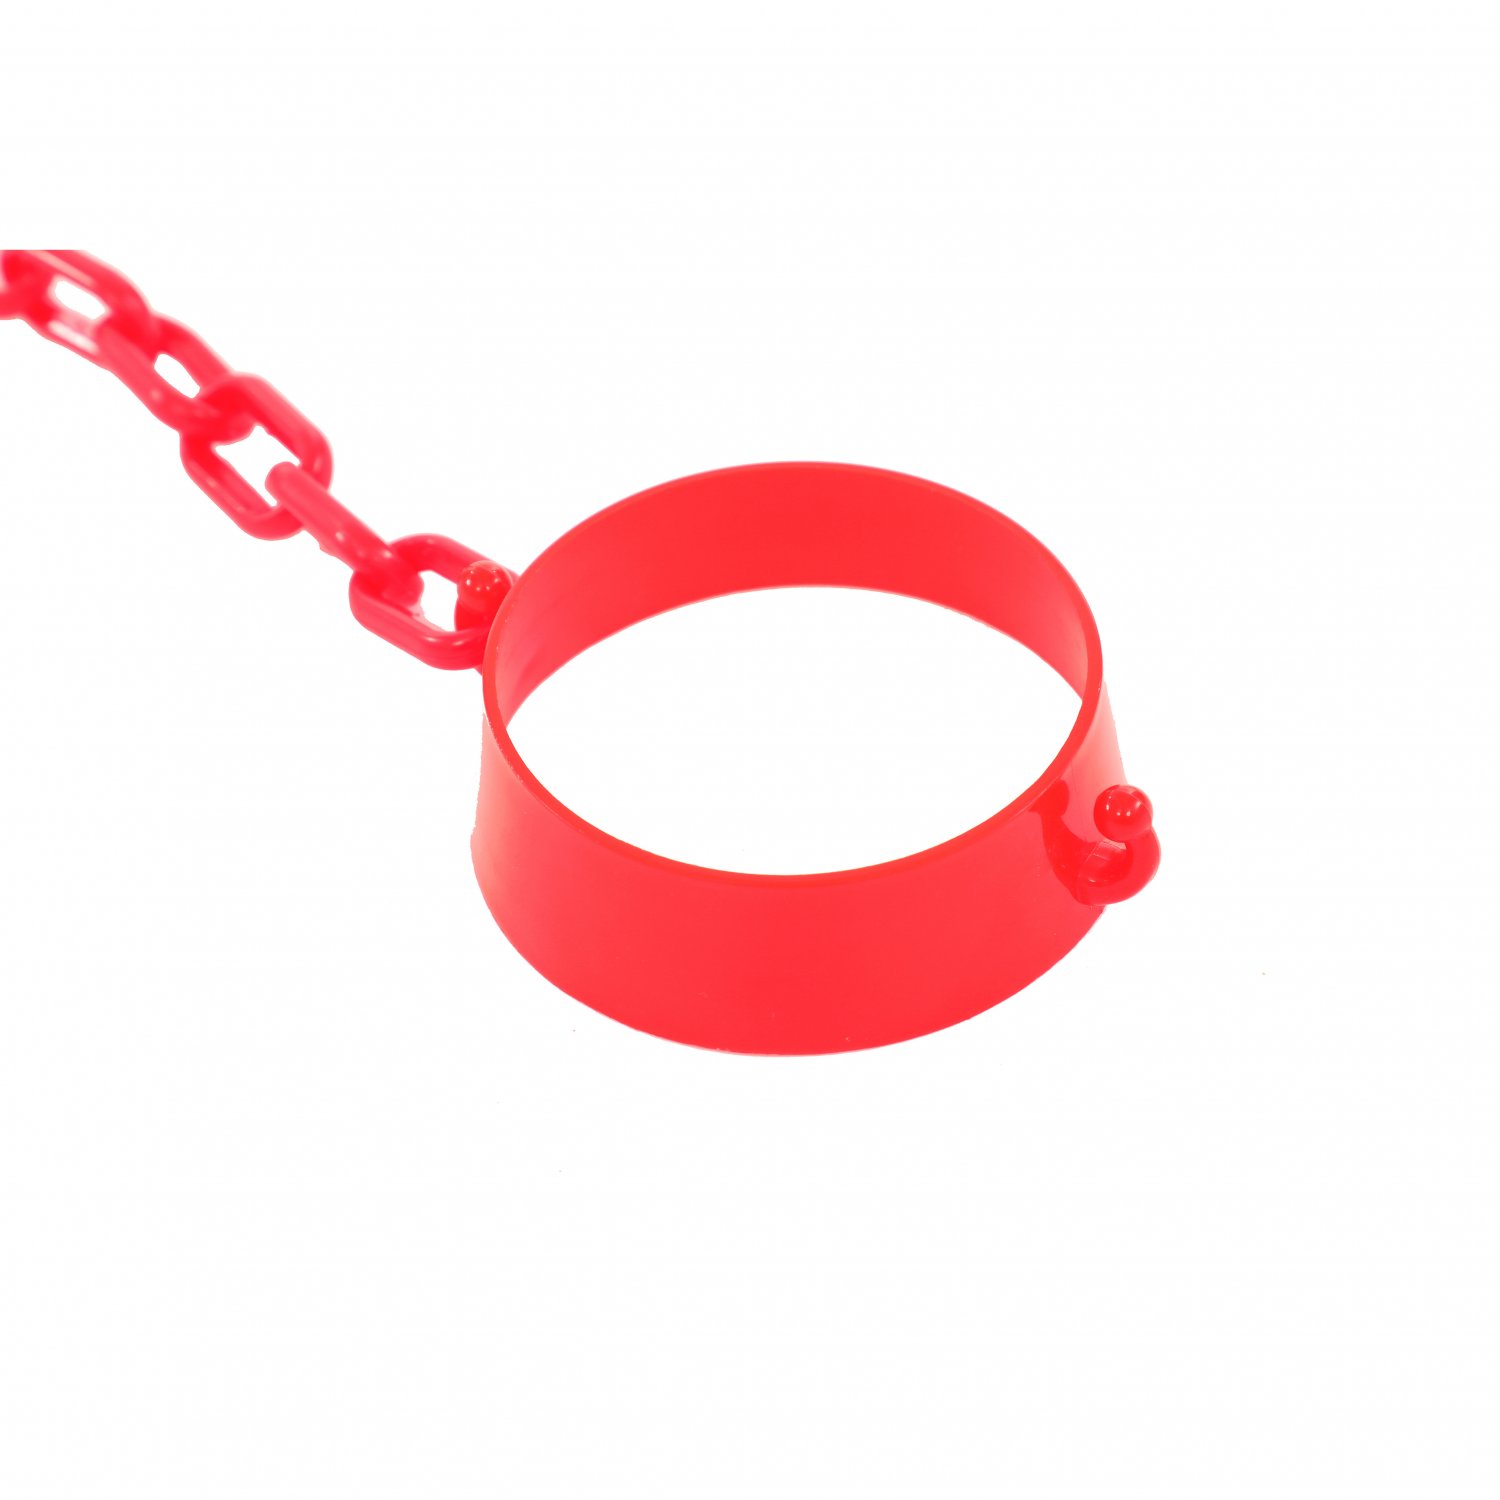 Set of 5 Chain Holders Including 5m Red Plastic Barrier For Road Cones NEW